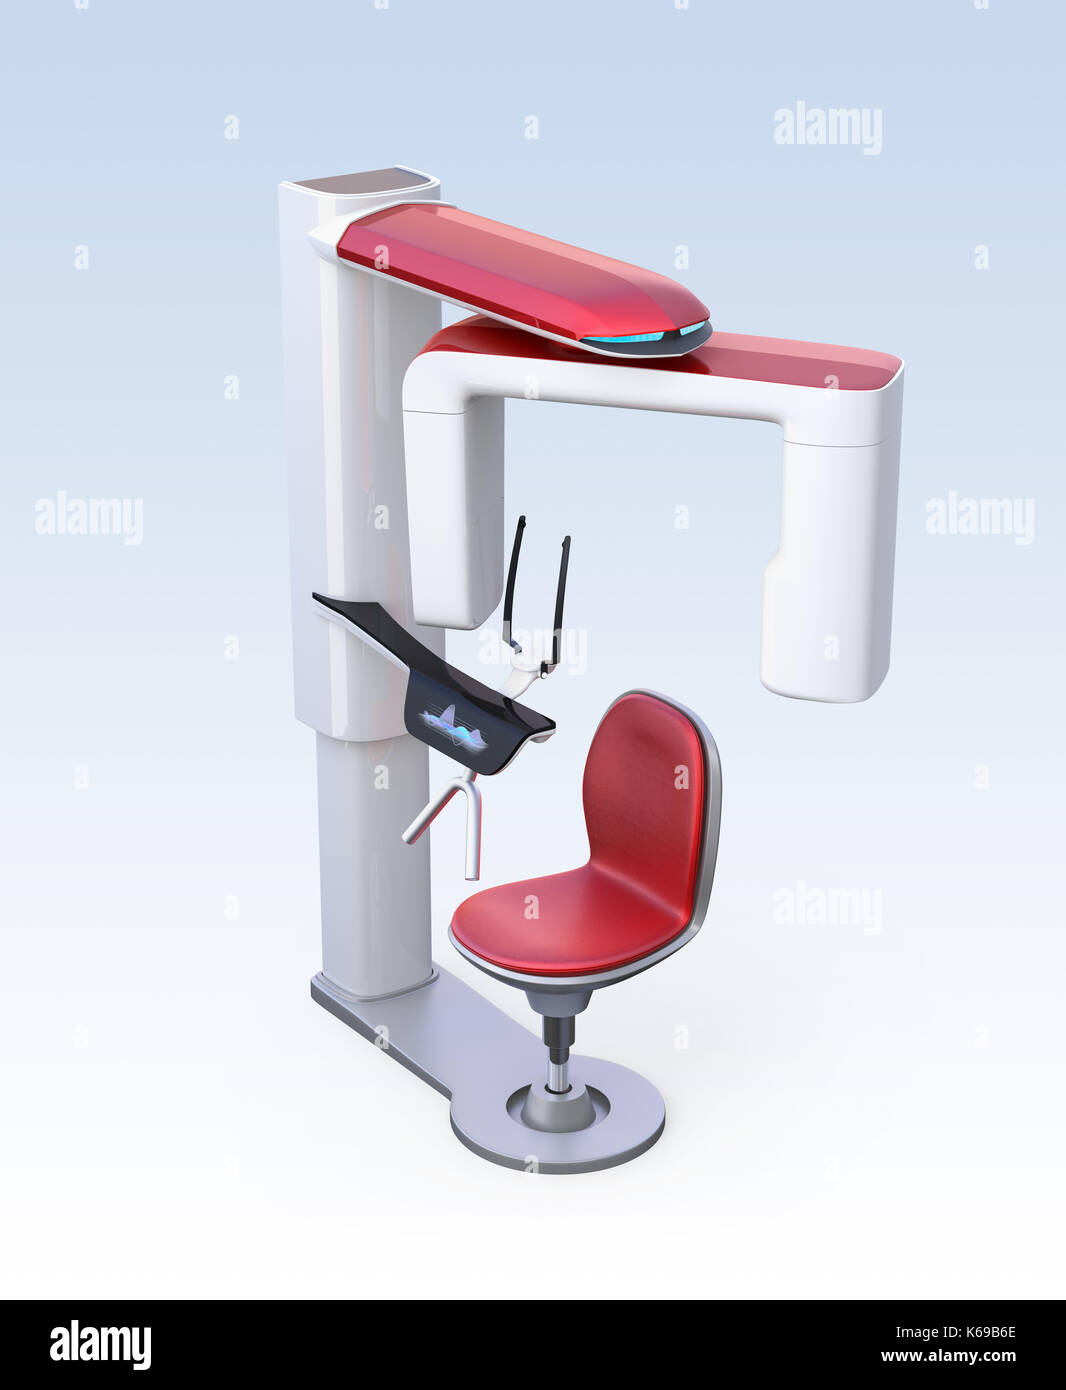 Dental 3D X-ray machine with patient chair isolated on gradient background. 3D rendering image. Stock Photo